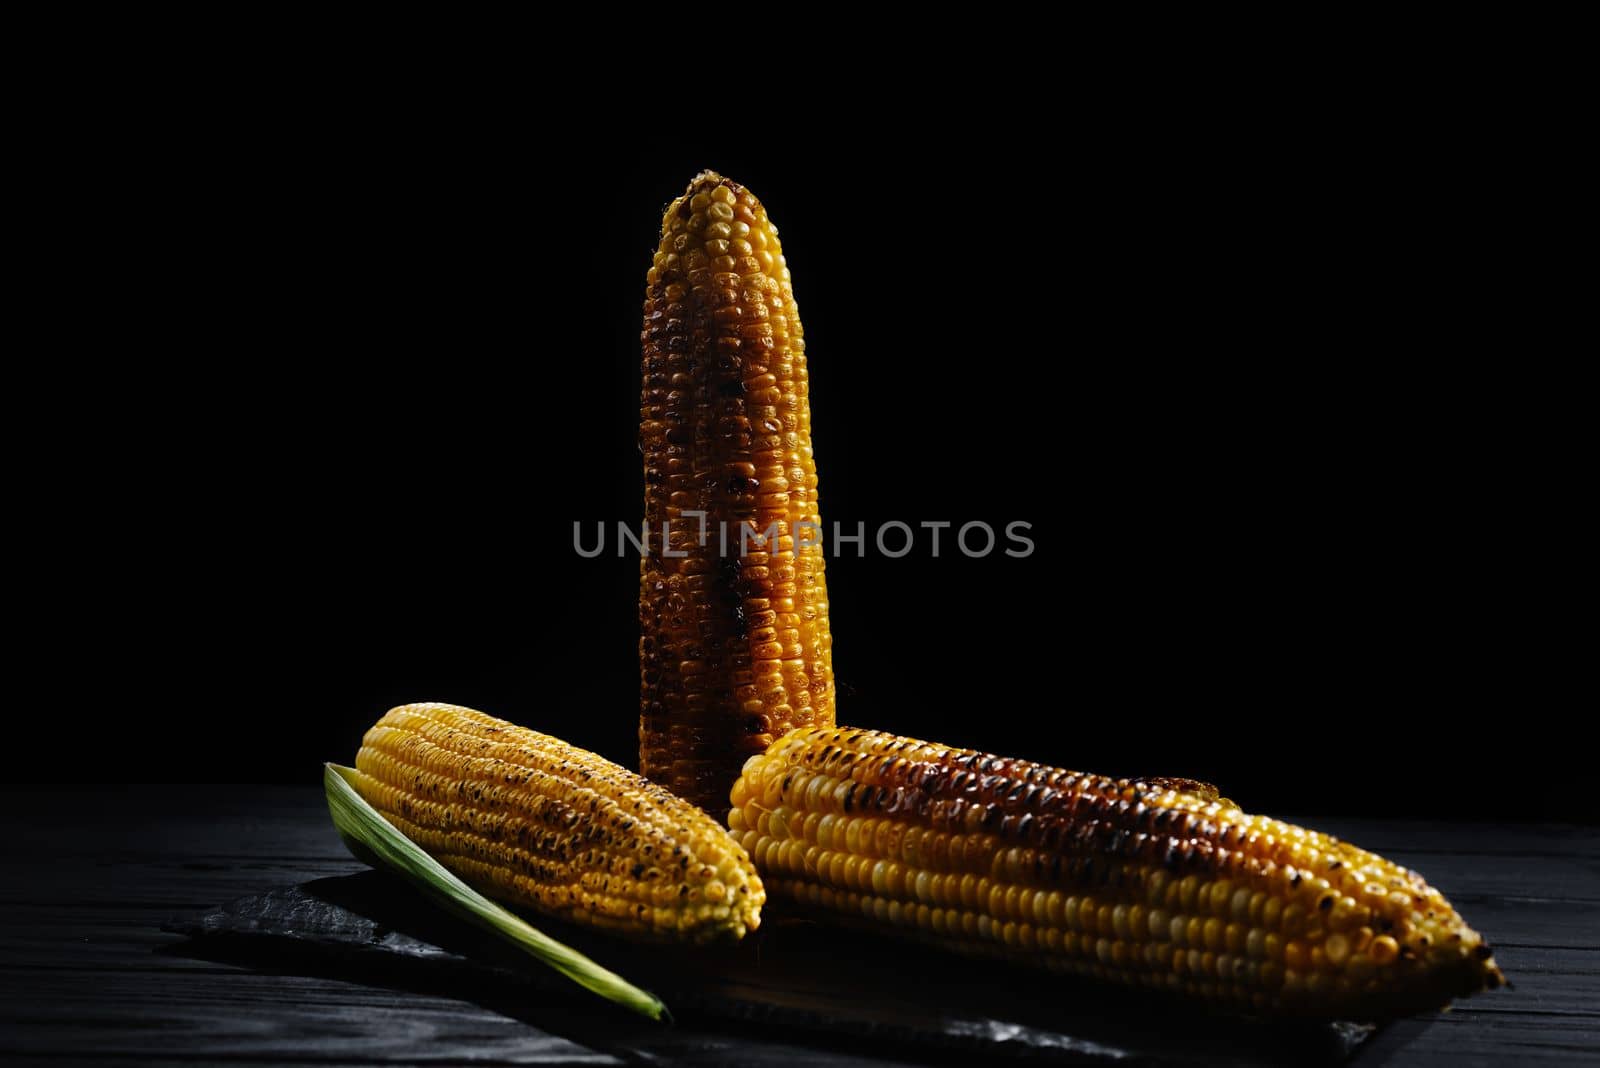 A cob of corn roasted over charcoal on a wooden board. Whole corn cobs. Dark background